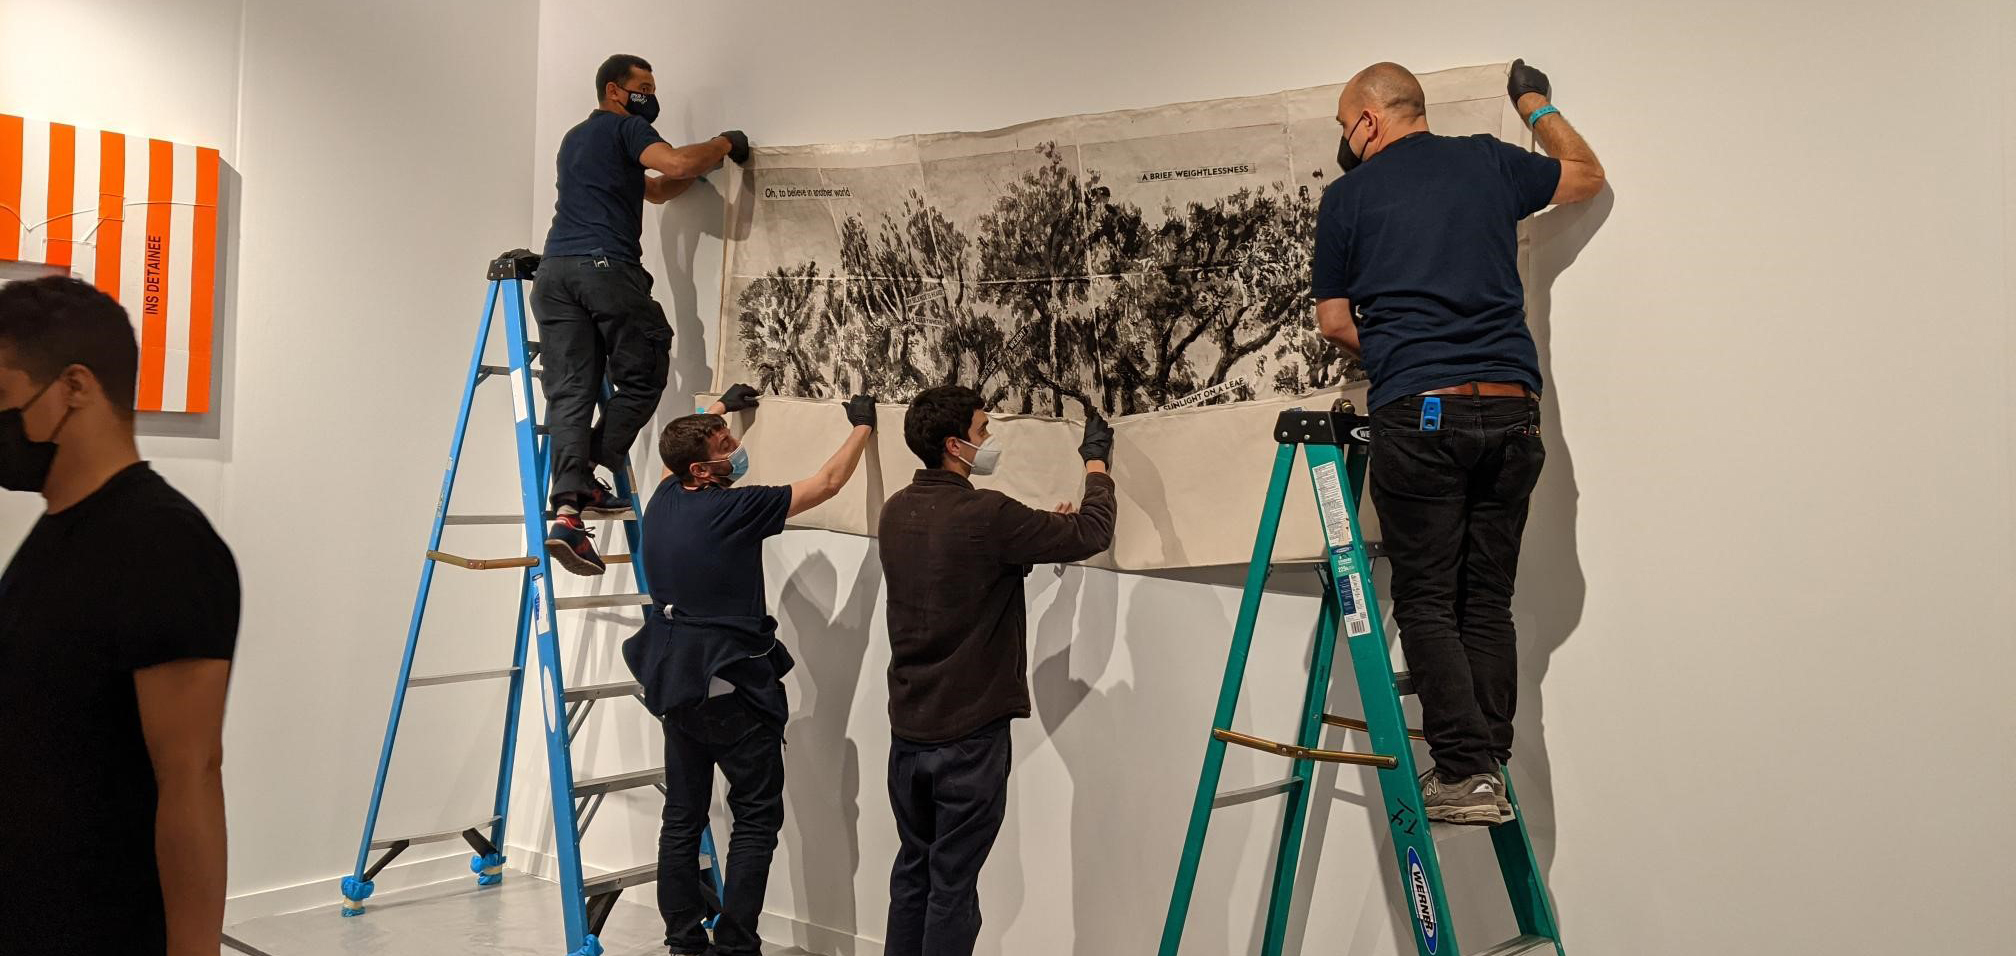 Artwork being installed in a gallery